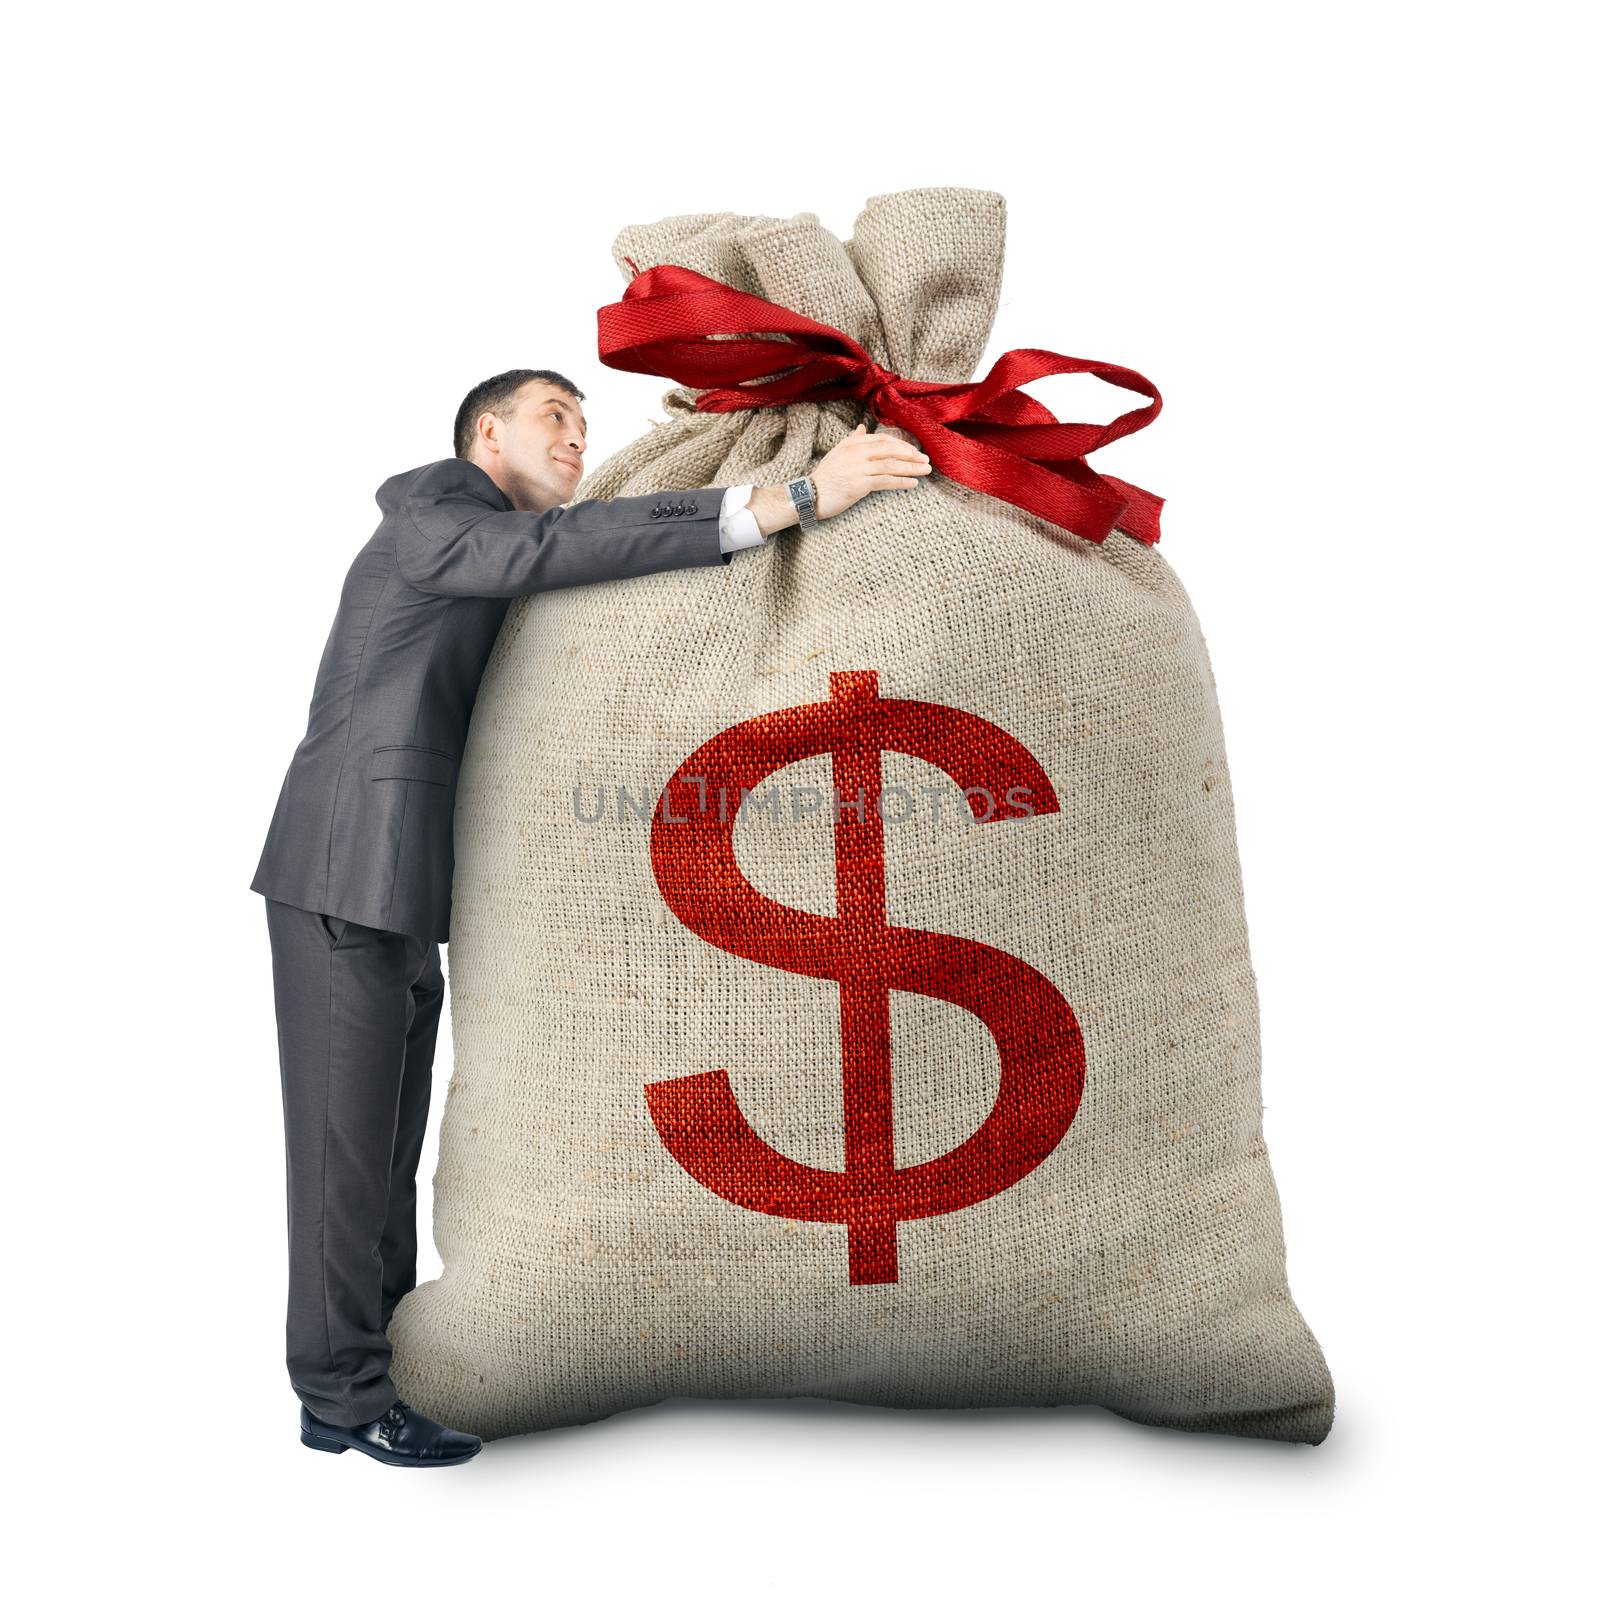 Businessman hugging big bag with dollar sign isolated on white background